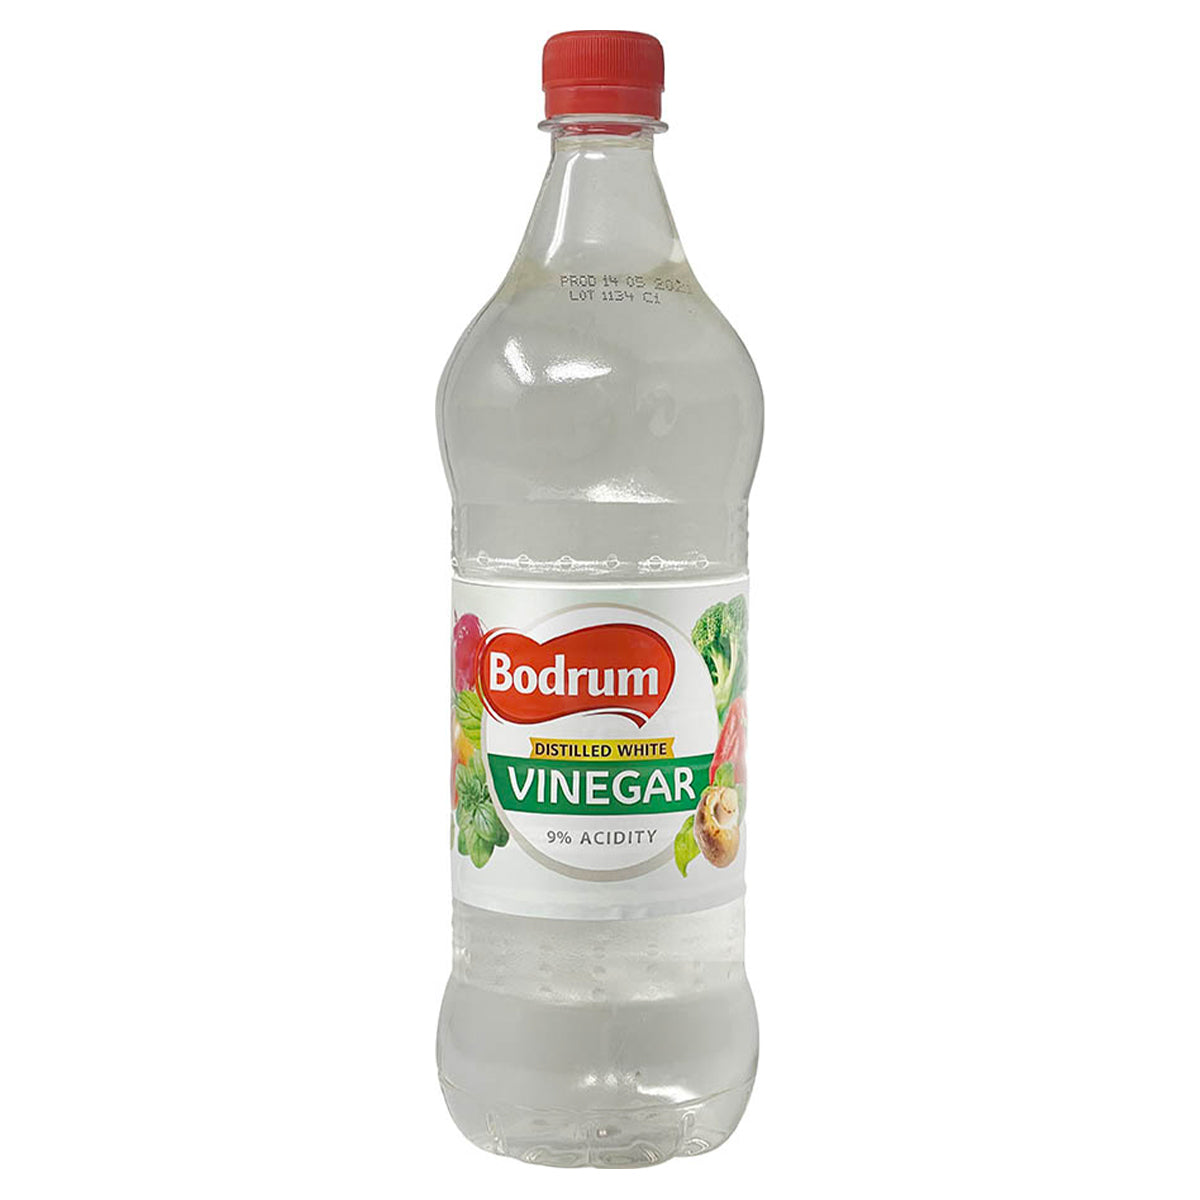 A bottle of Bodrum - White Vinegar - 1L on a white background.